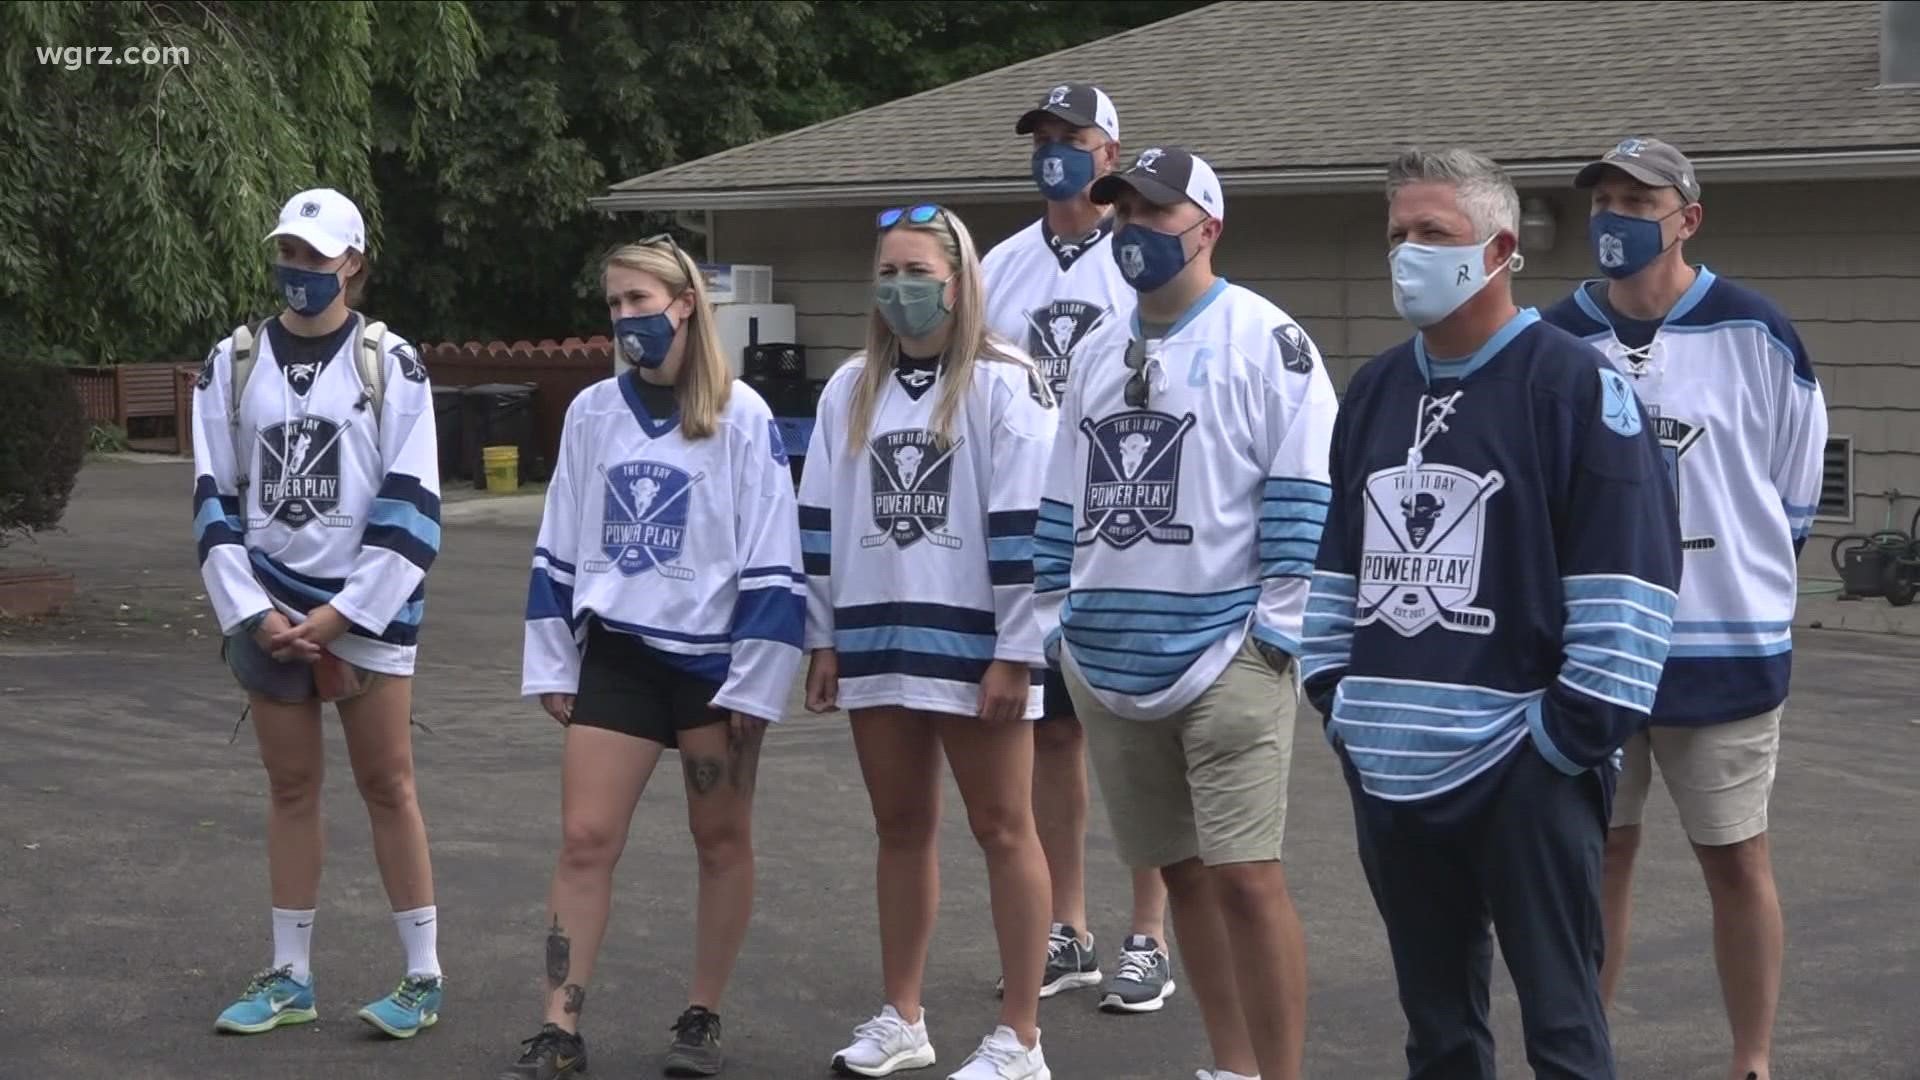 The bulk of the money raised by the 11 Day Power Play will be going to cancer research at Roswell Park, but another big beneficiary is Camp Good Days.